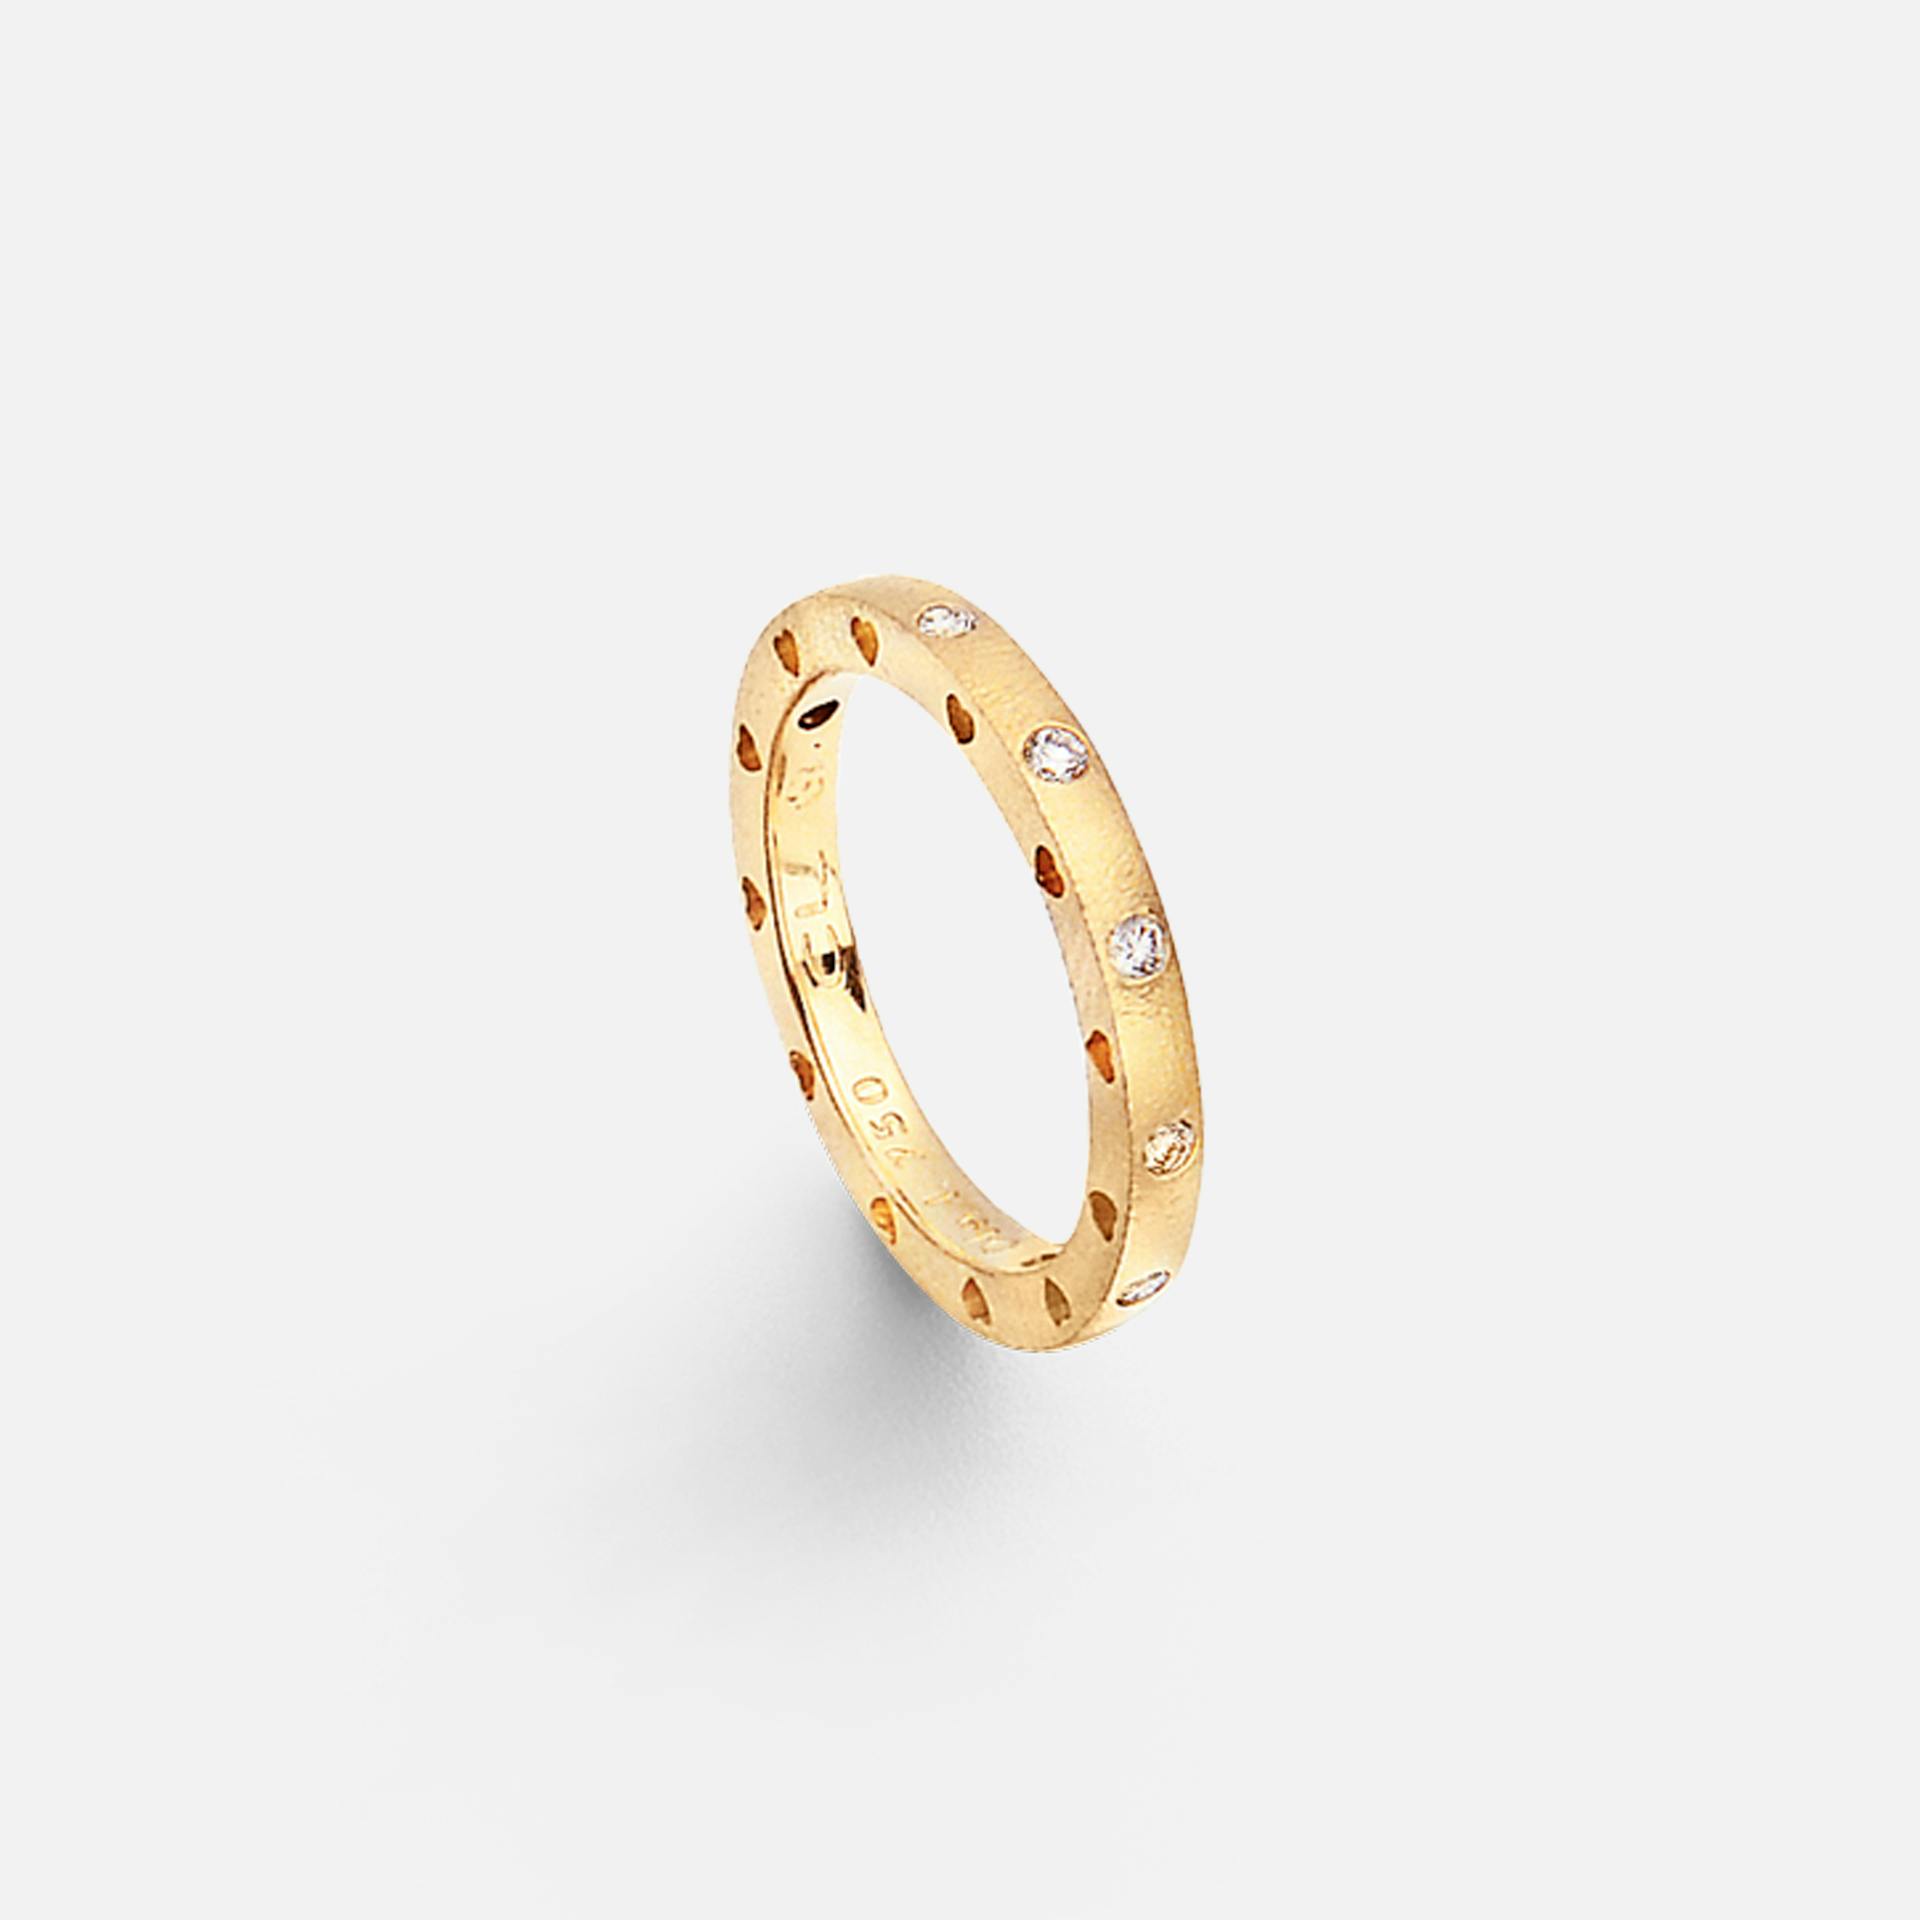 Forever Love Ring in Textured Yellow Gold with Diamonds  |  Ole Lynggaard Copenhagen